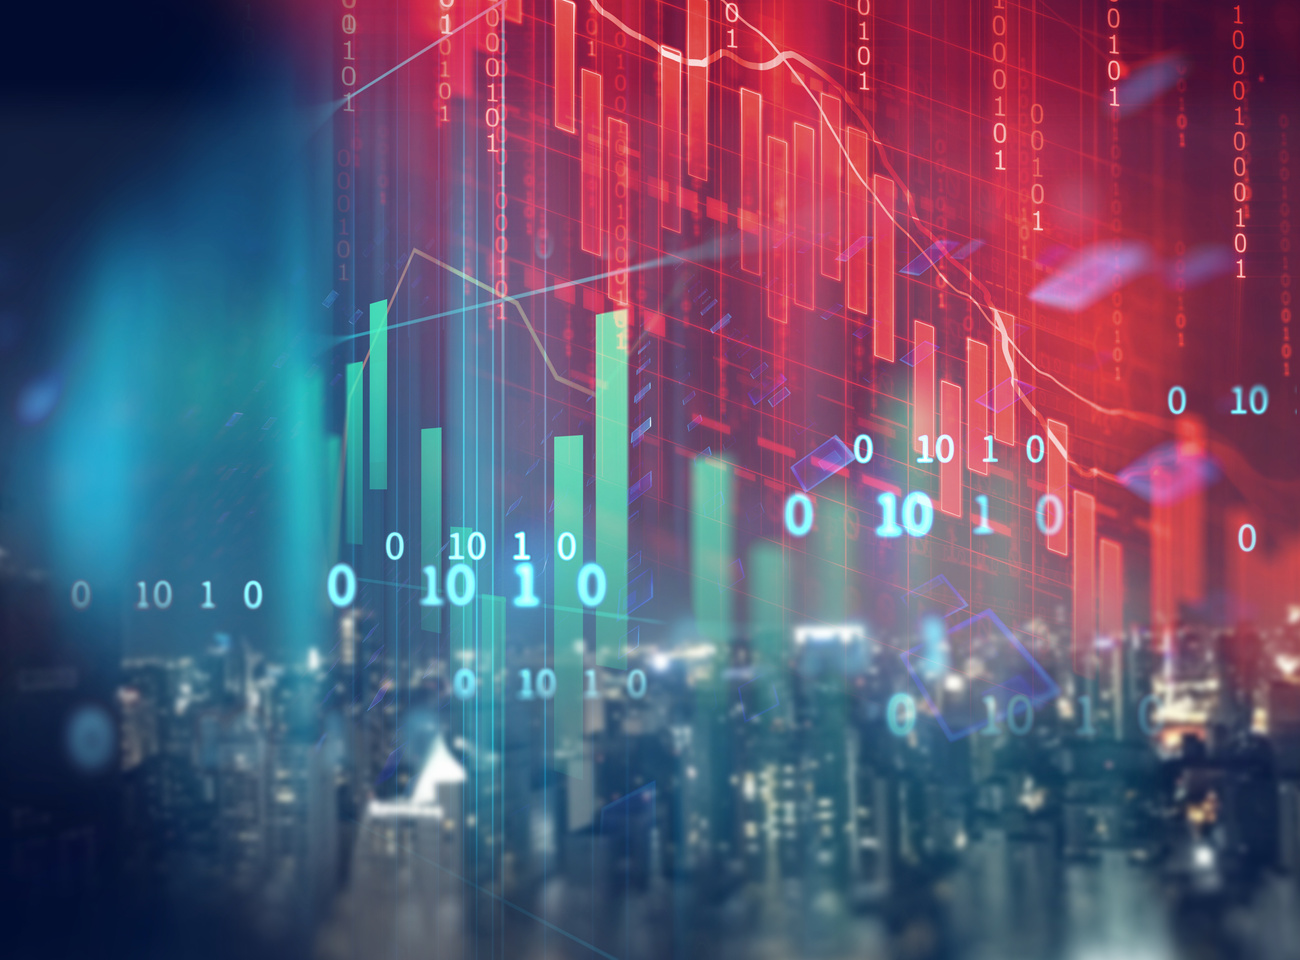 double exposure image of stock market investment graph and city skyline scene.